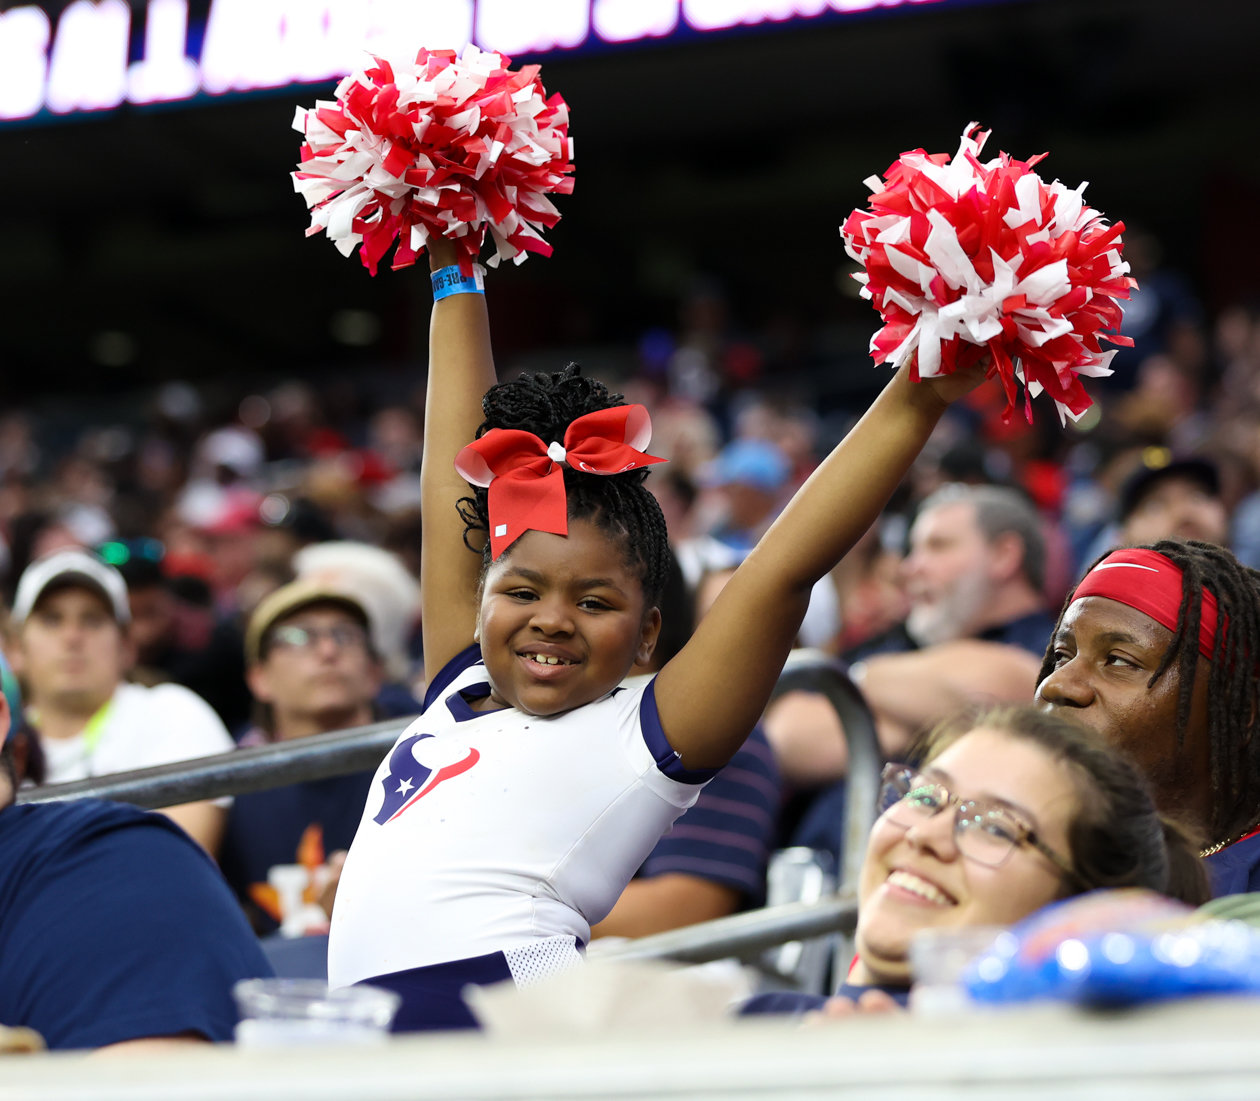 A Texans fan dresses up as a cheerleader during an NFL game between the Texans and the Titans on Oct. 30, 2022 in Houston.